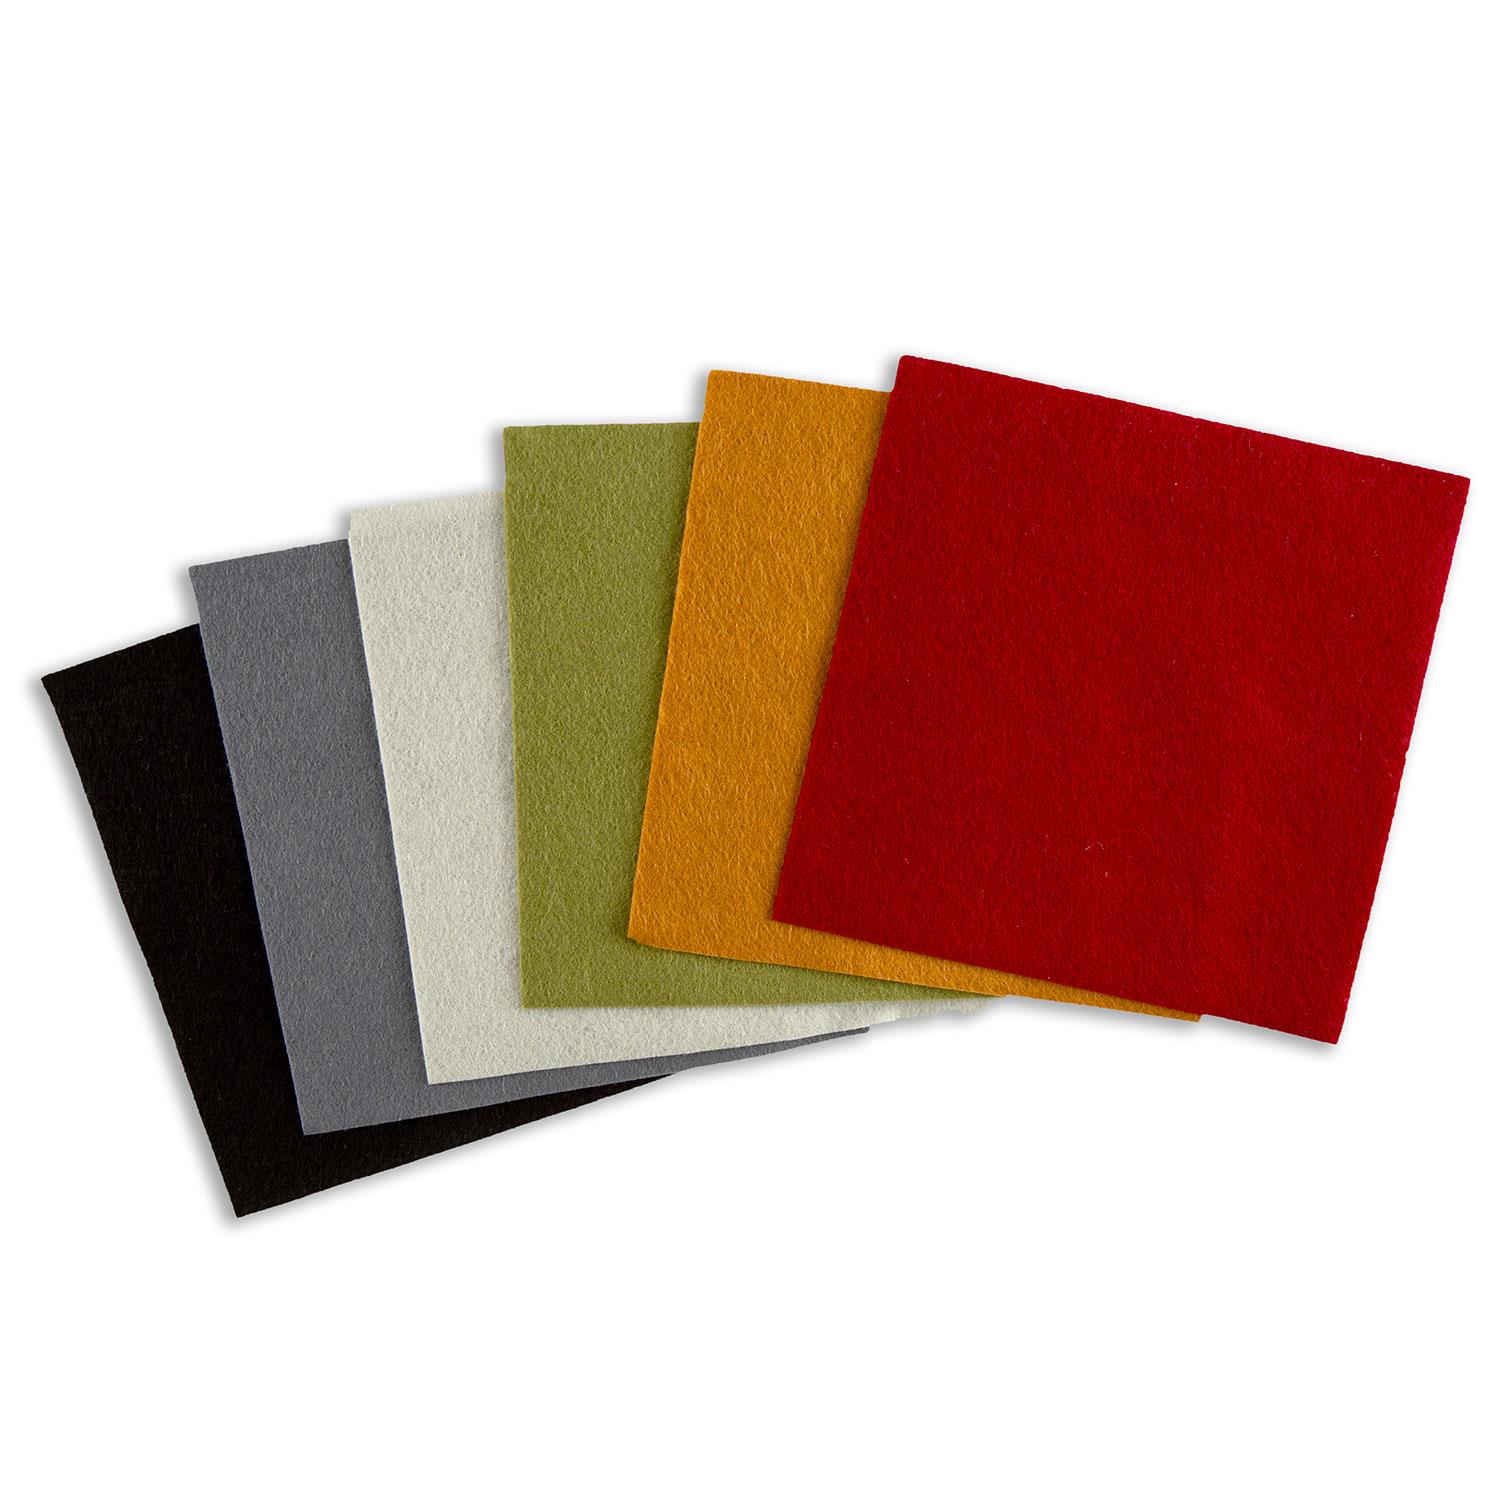 Felt by Clarity Pack of 6 Non-Adhesive Mixed Colour Felt 6x6" Squares Pick N Mix - Pick Any 2 - Funky Circle